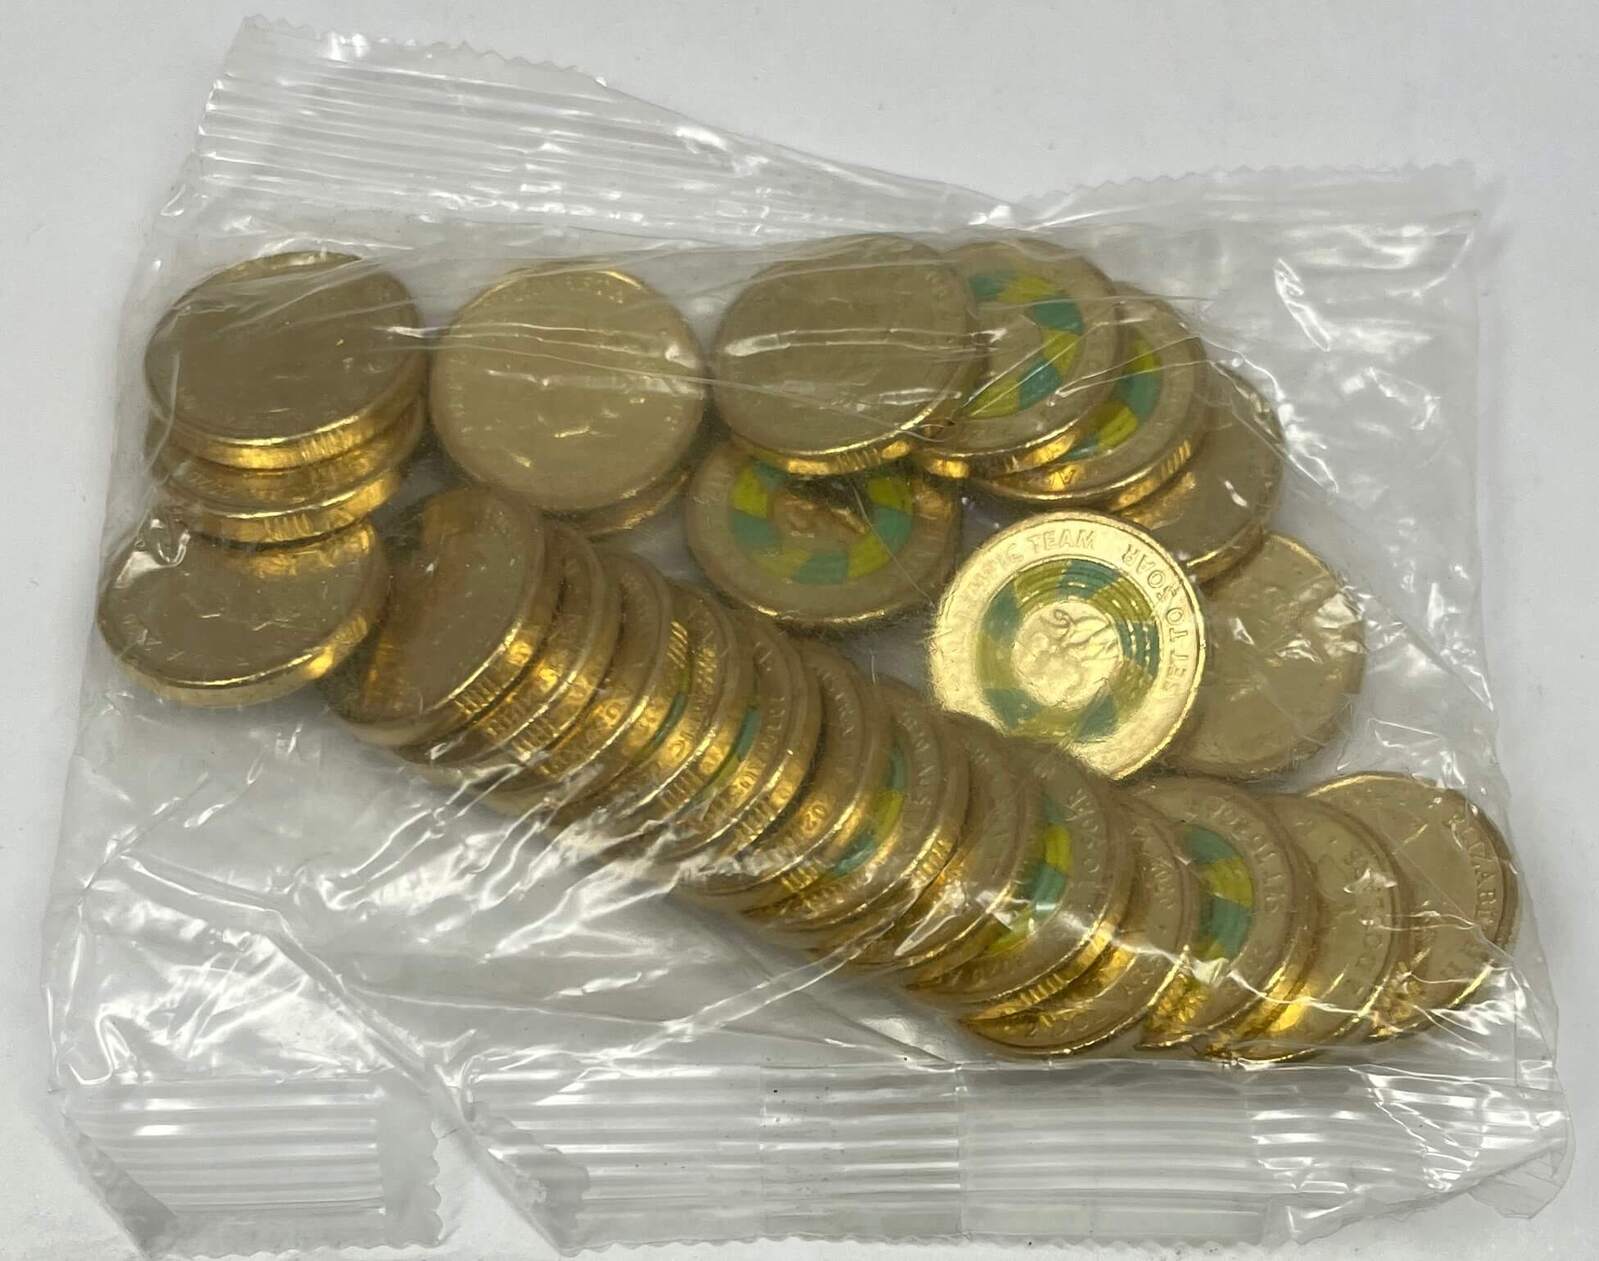 2020 Mint Bag of 25 Uncirculated $2 Coins Paralympics product image